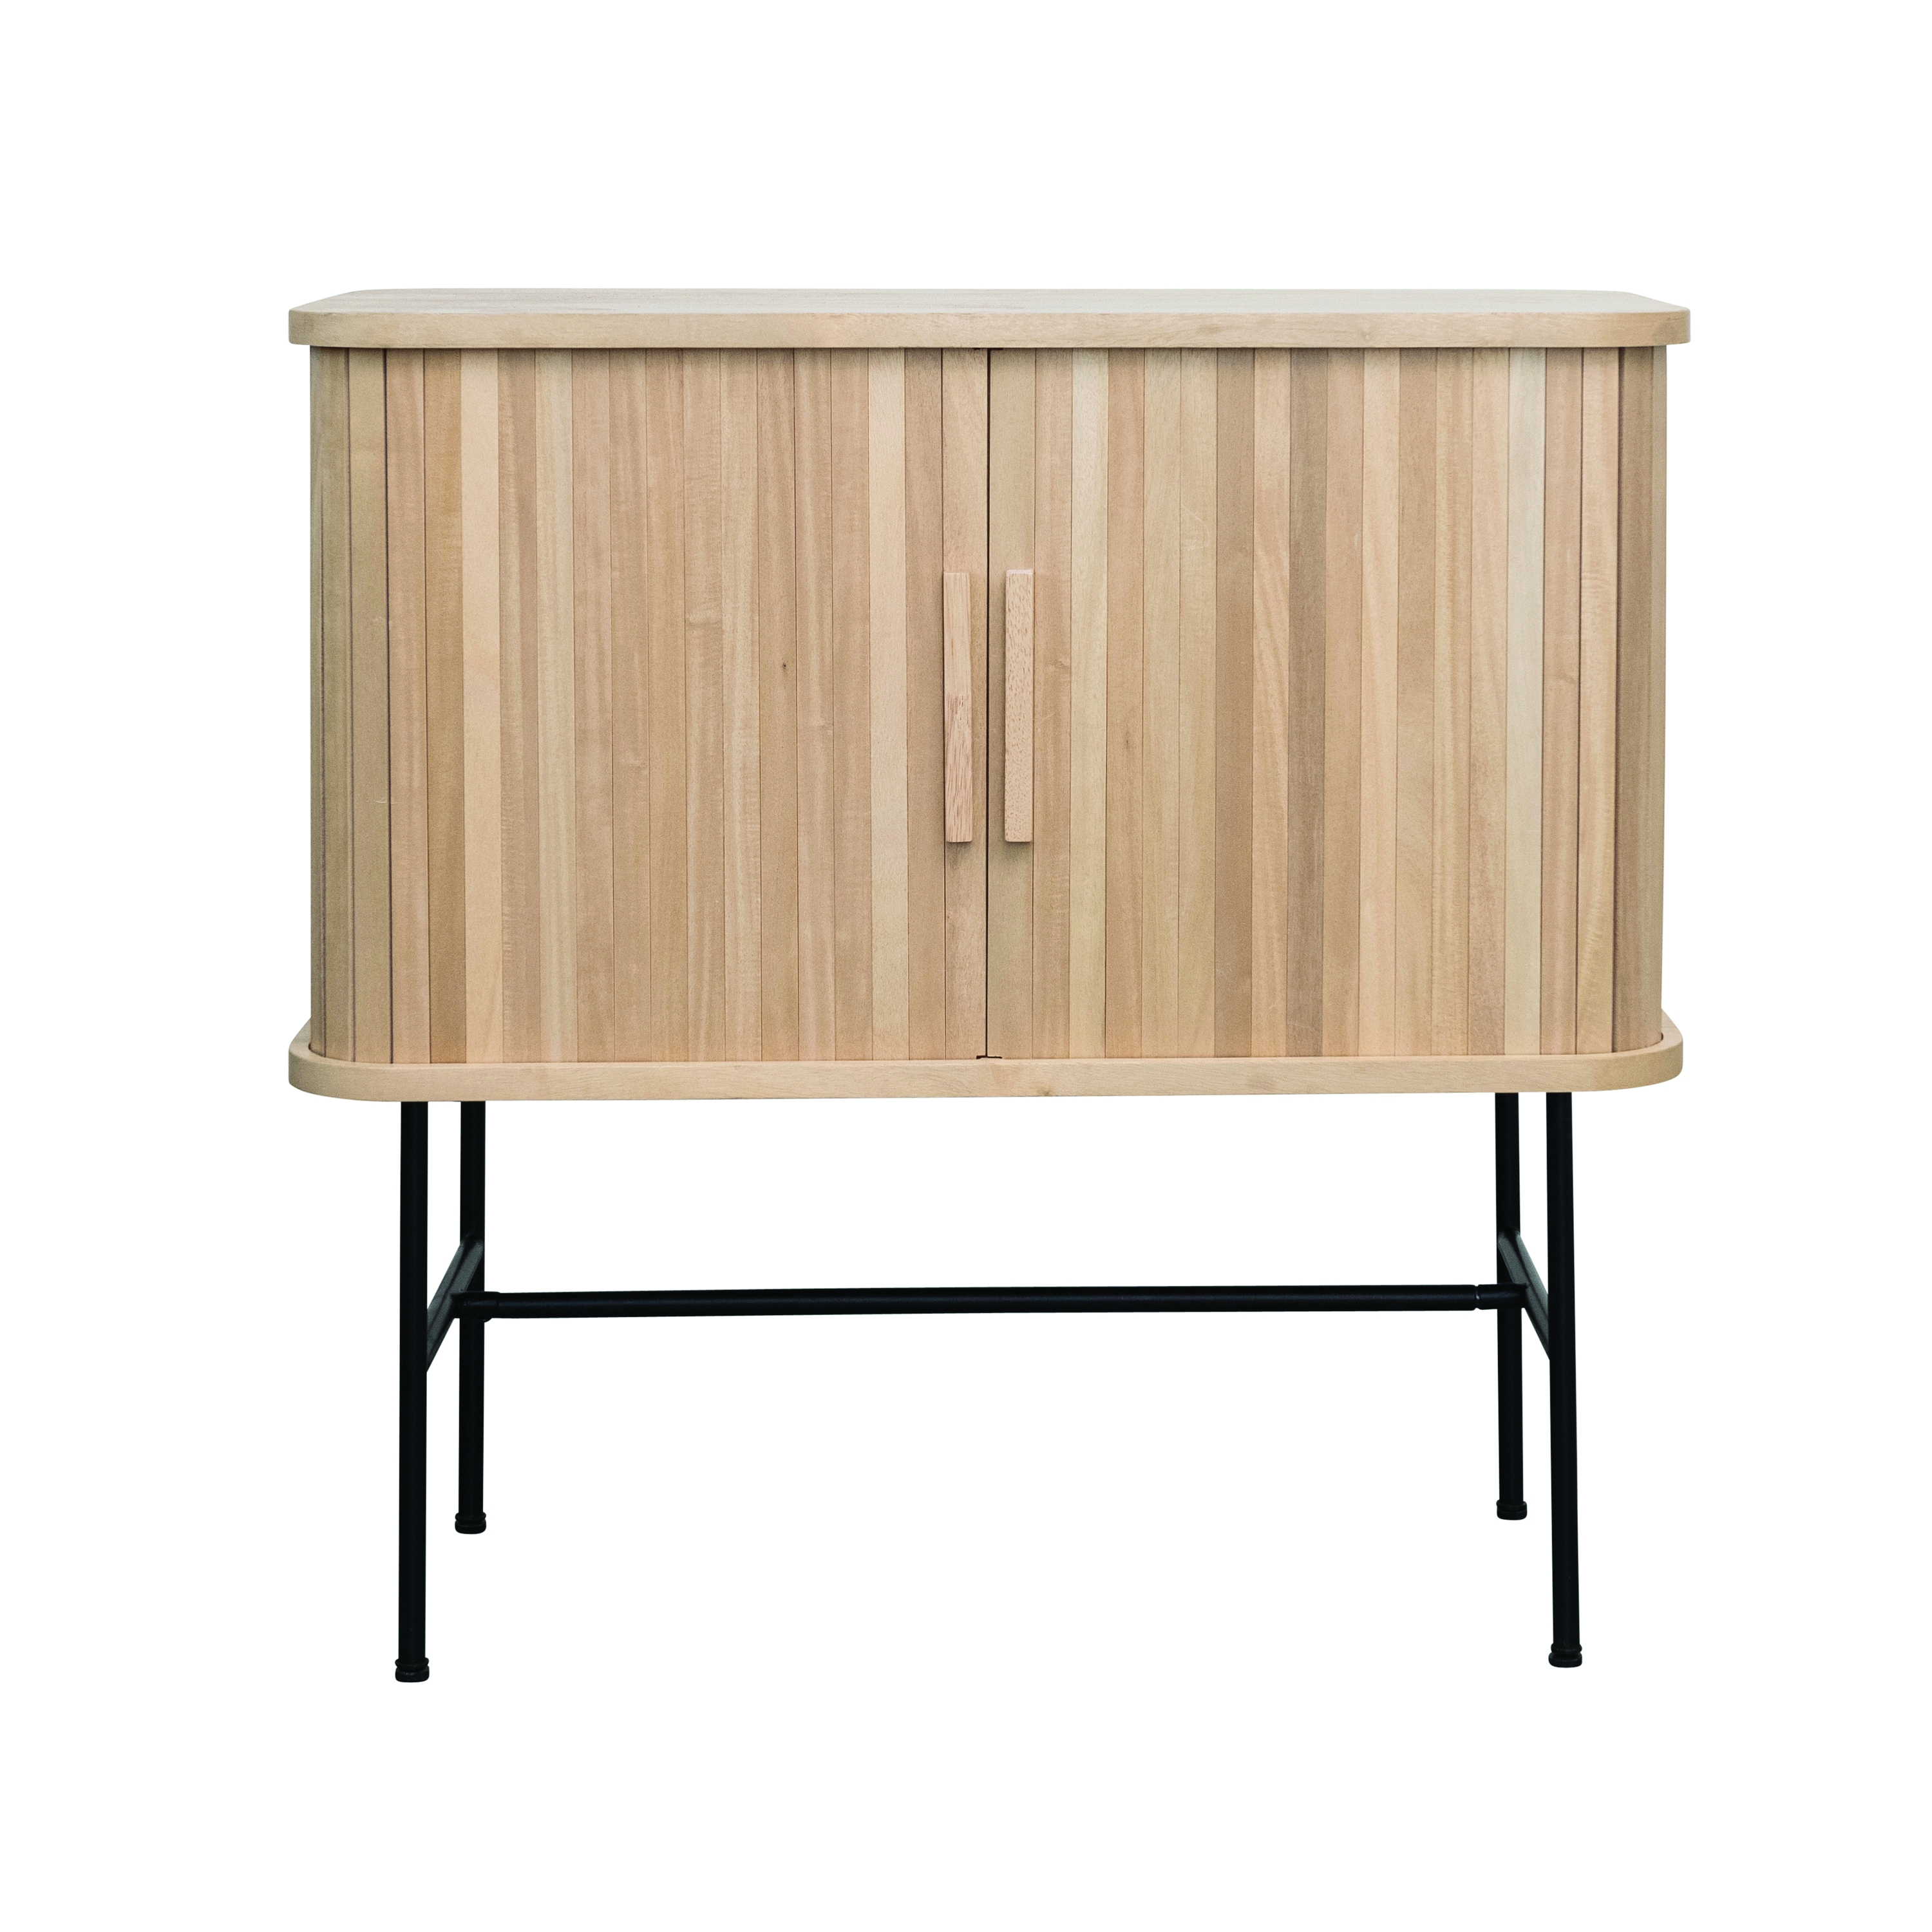 Modern Wood and Metal Cabinet with Sliding Doors and 3 Storage Compartments, Natural and Black - Image 0